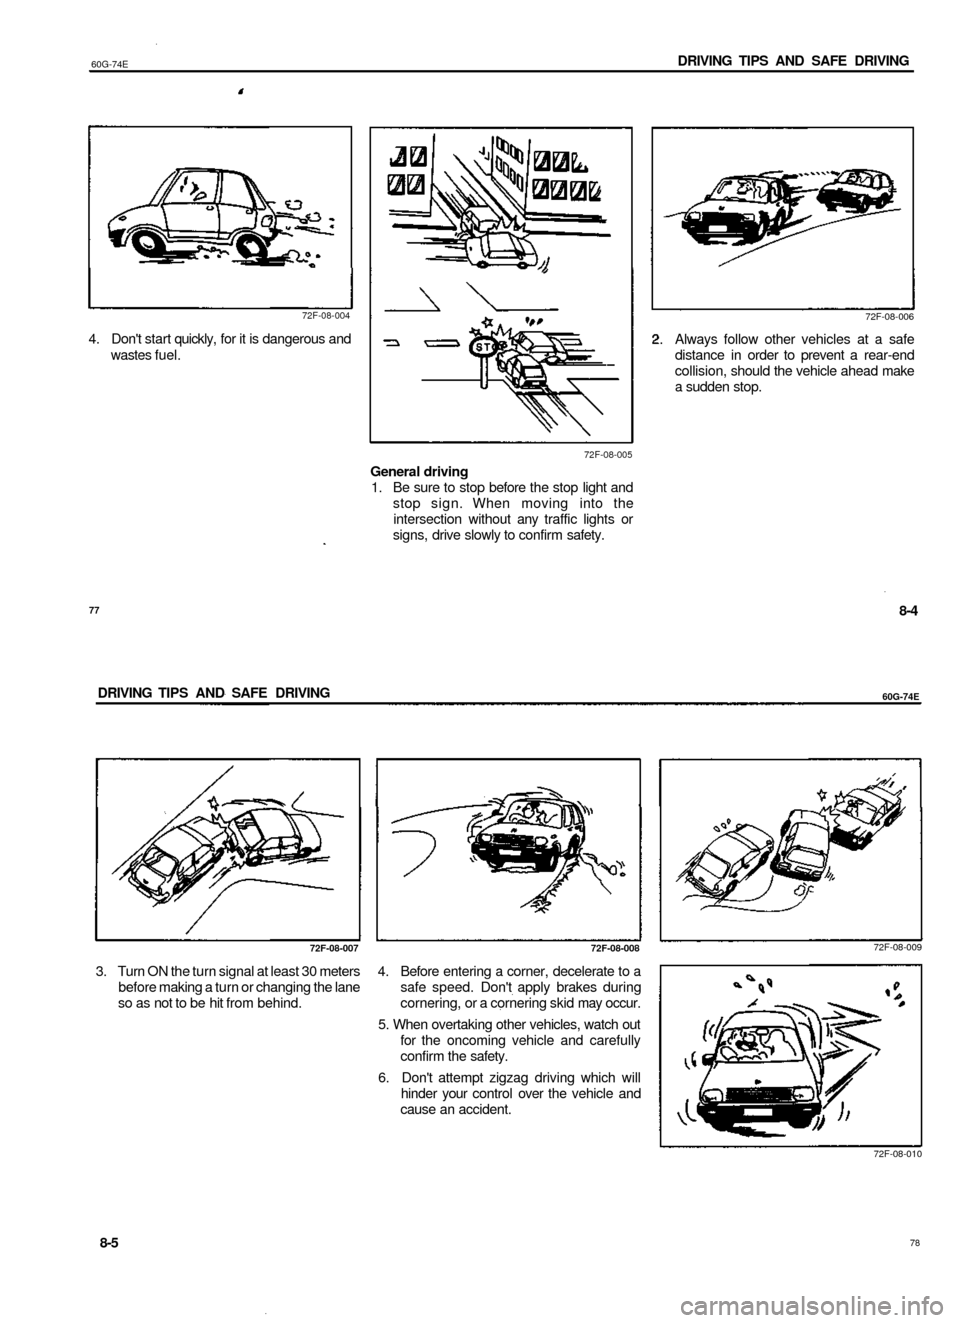 SUZUKI BALENO 1999 1.G Owners Manual 
60G-74E 
DRIVING TIPS AND SAFE DRIVING

72F-08-004

4. Dont start quickly, for it is dangerous and

wastes fuel. 
72F-08-006

72F-08-005

General driving

1. Be sure to stop before the stop light an